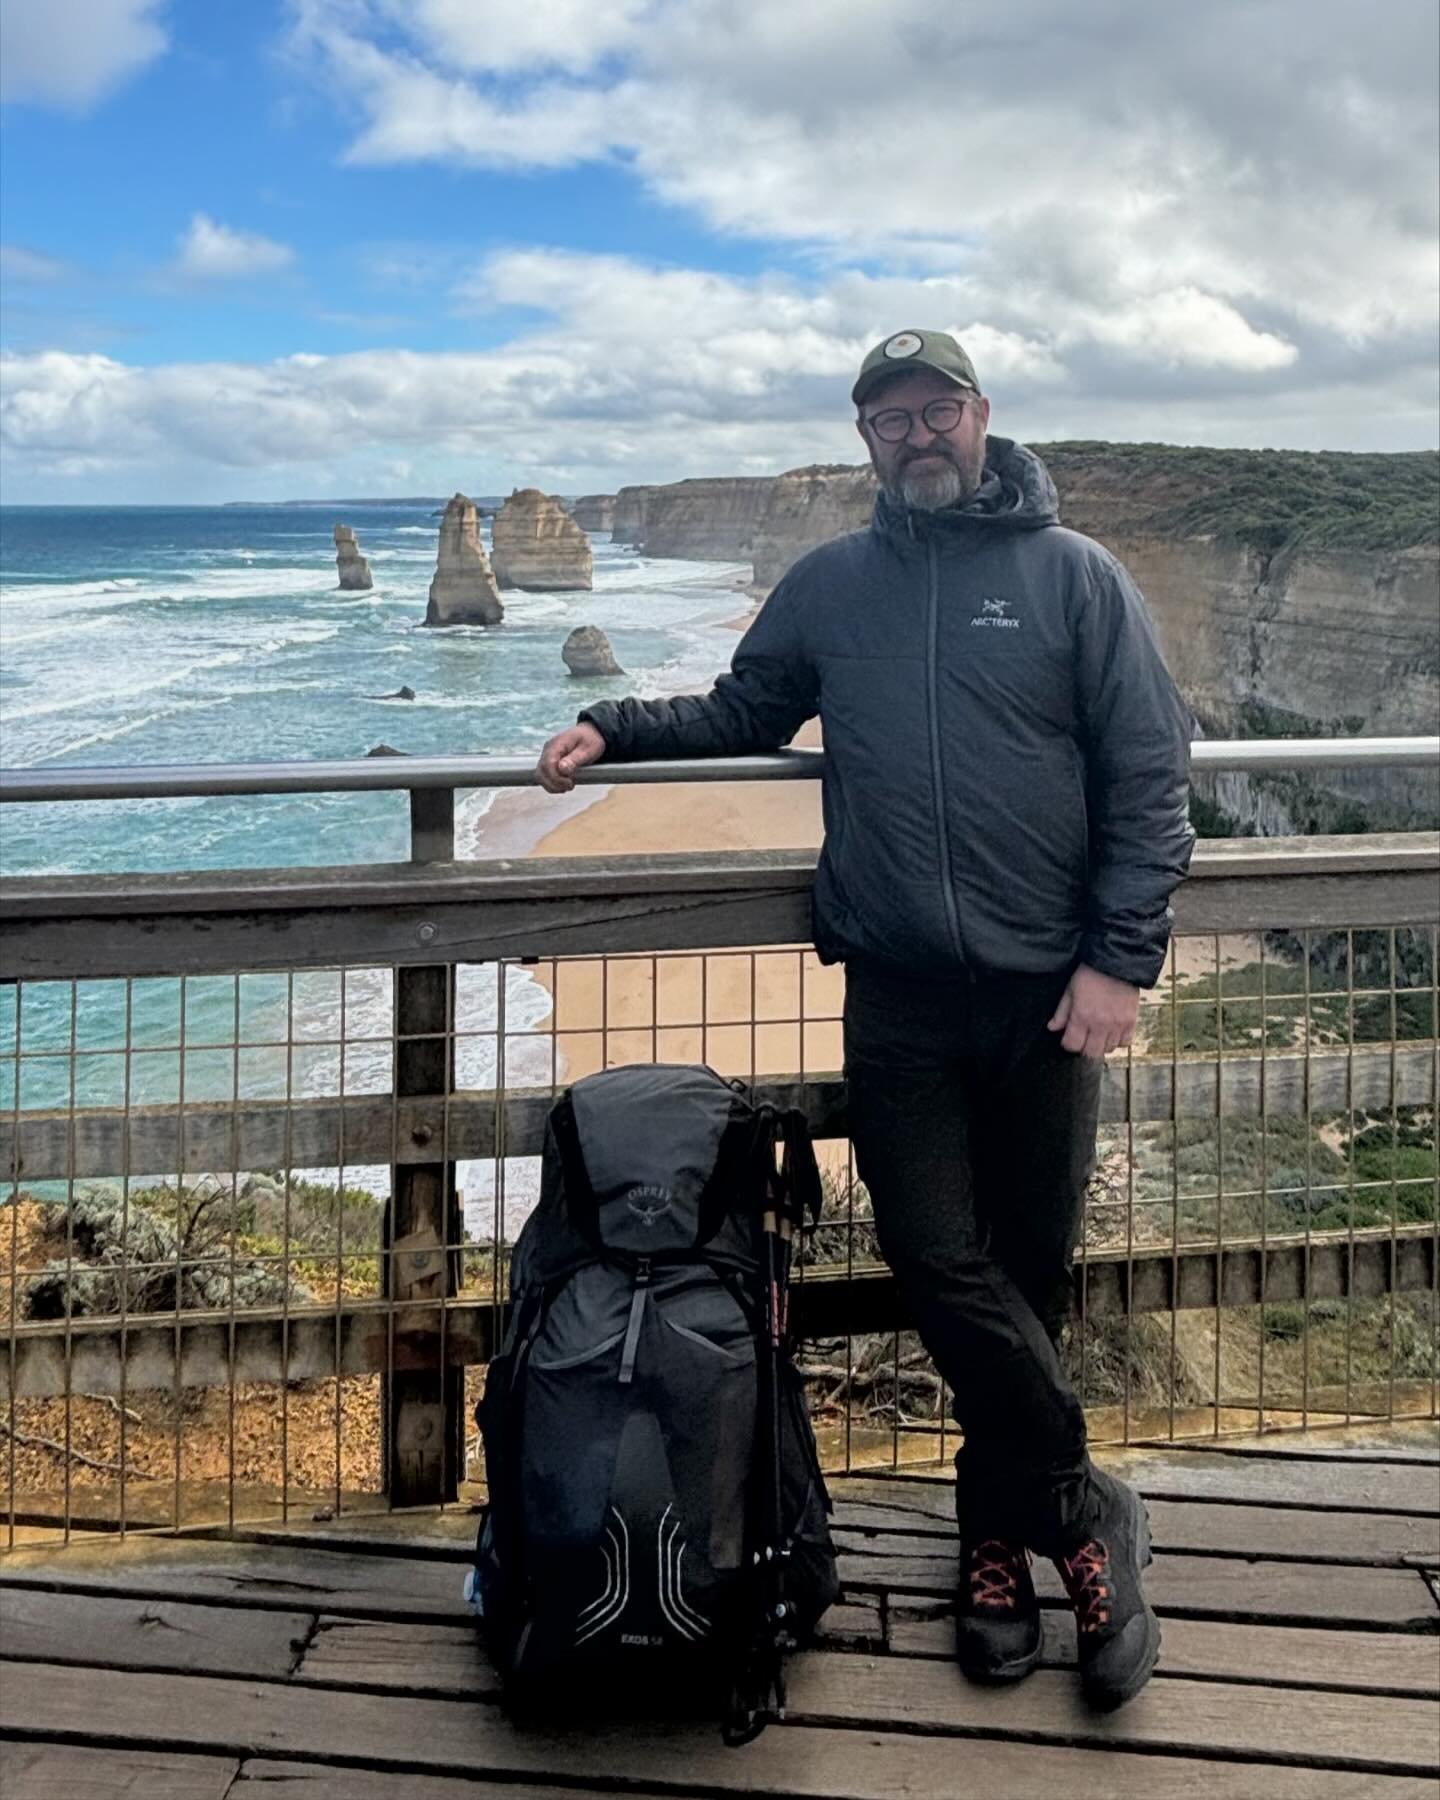 Me and the Twelve Apostles. Around half have gone for a swim at this point in time. Walked one hundred kms over the last 6 days through such extraordinarily beautiful coastal bushland. And every day the power of the southern ocean resonated with ever